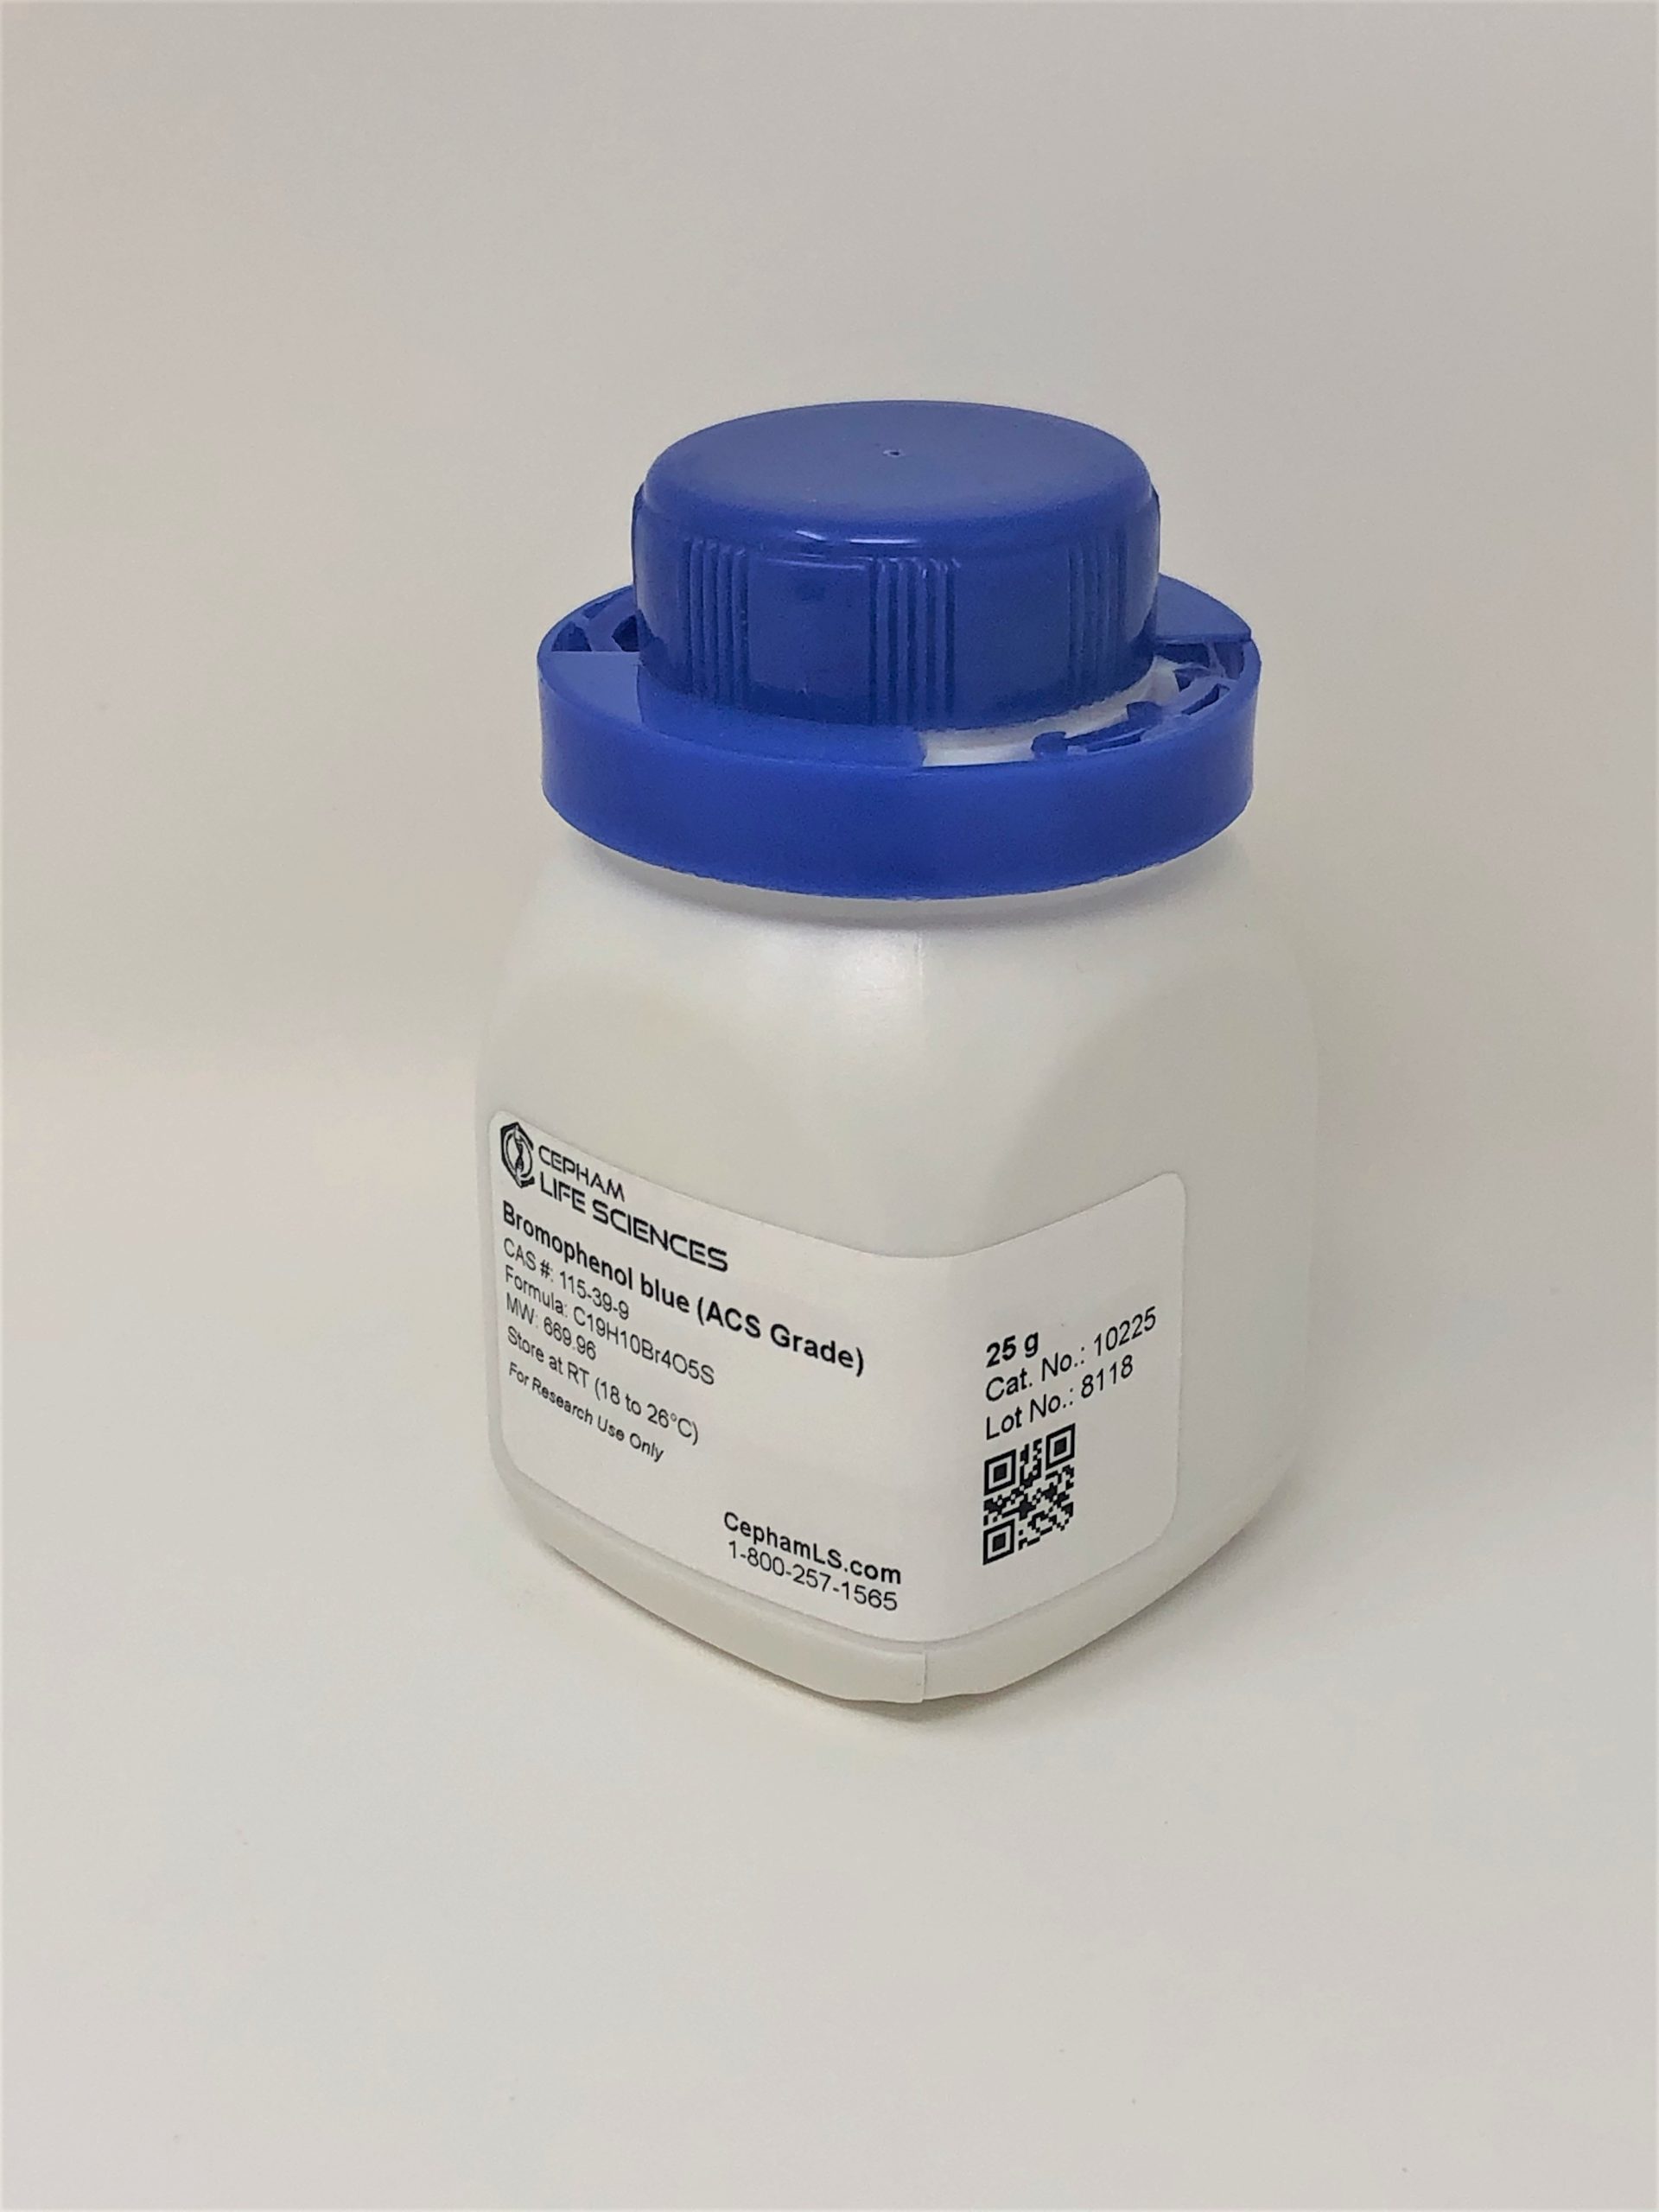 Bromophenol blue (ACS Grade) Cepham Life Sciences Research Products